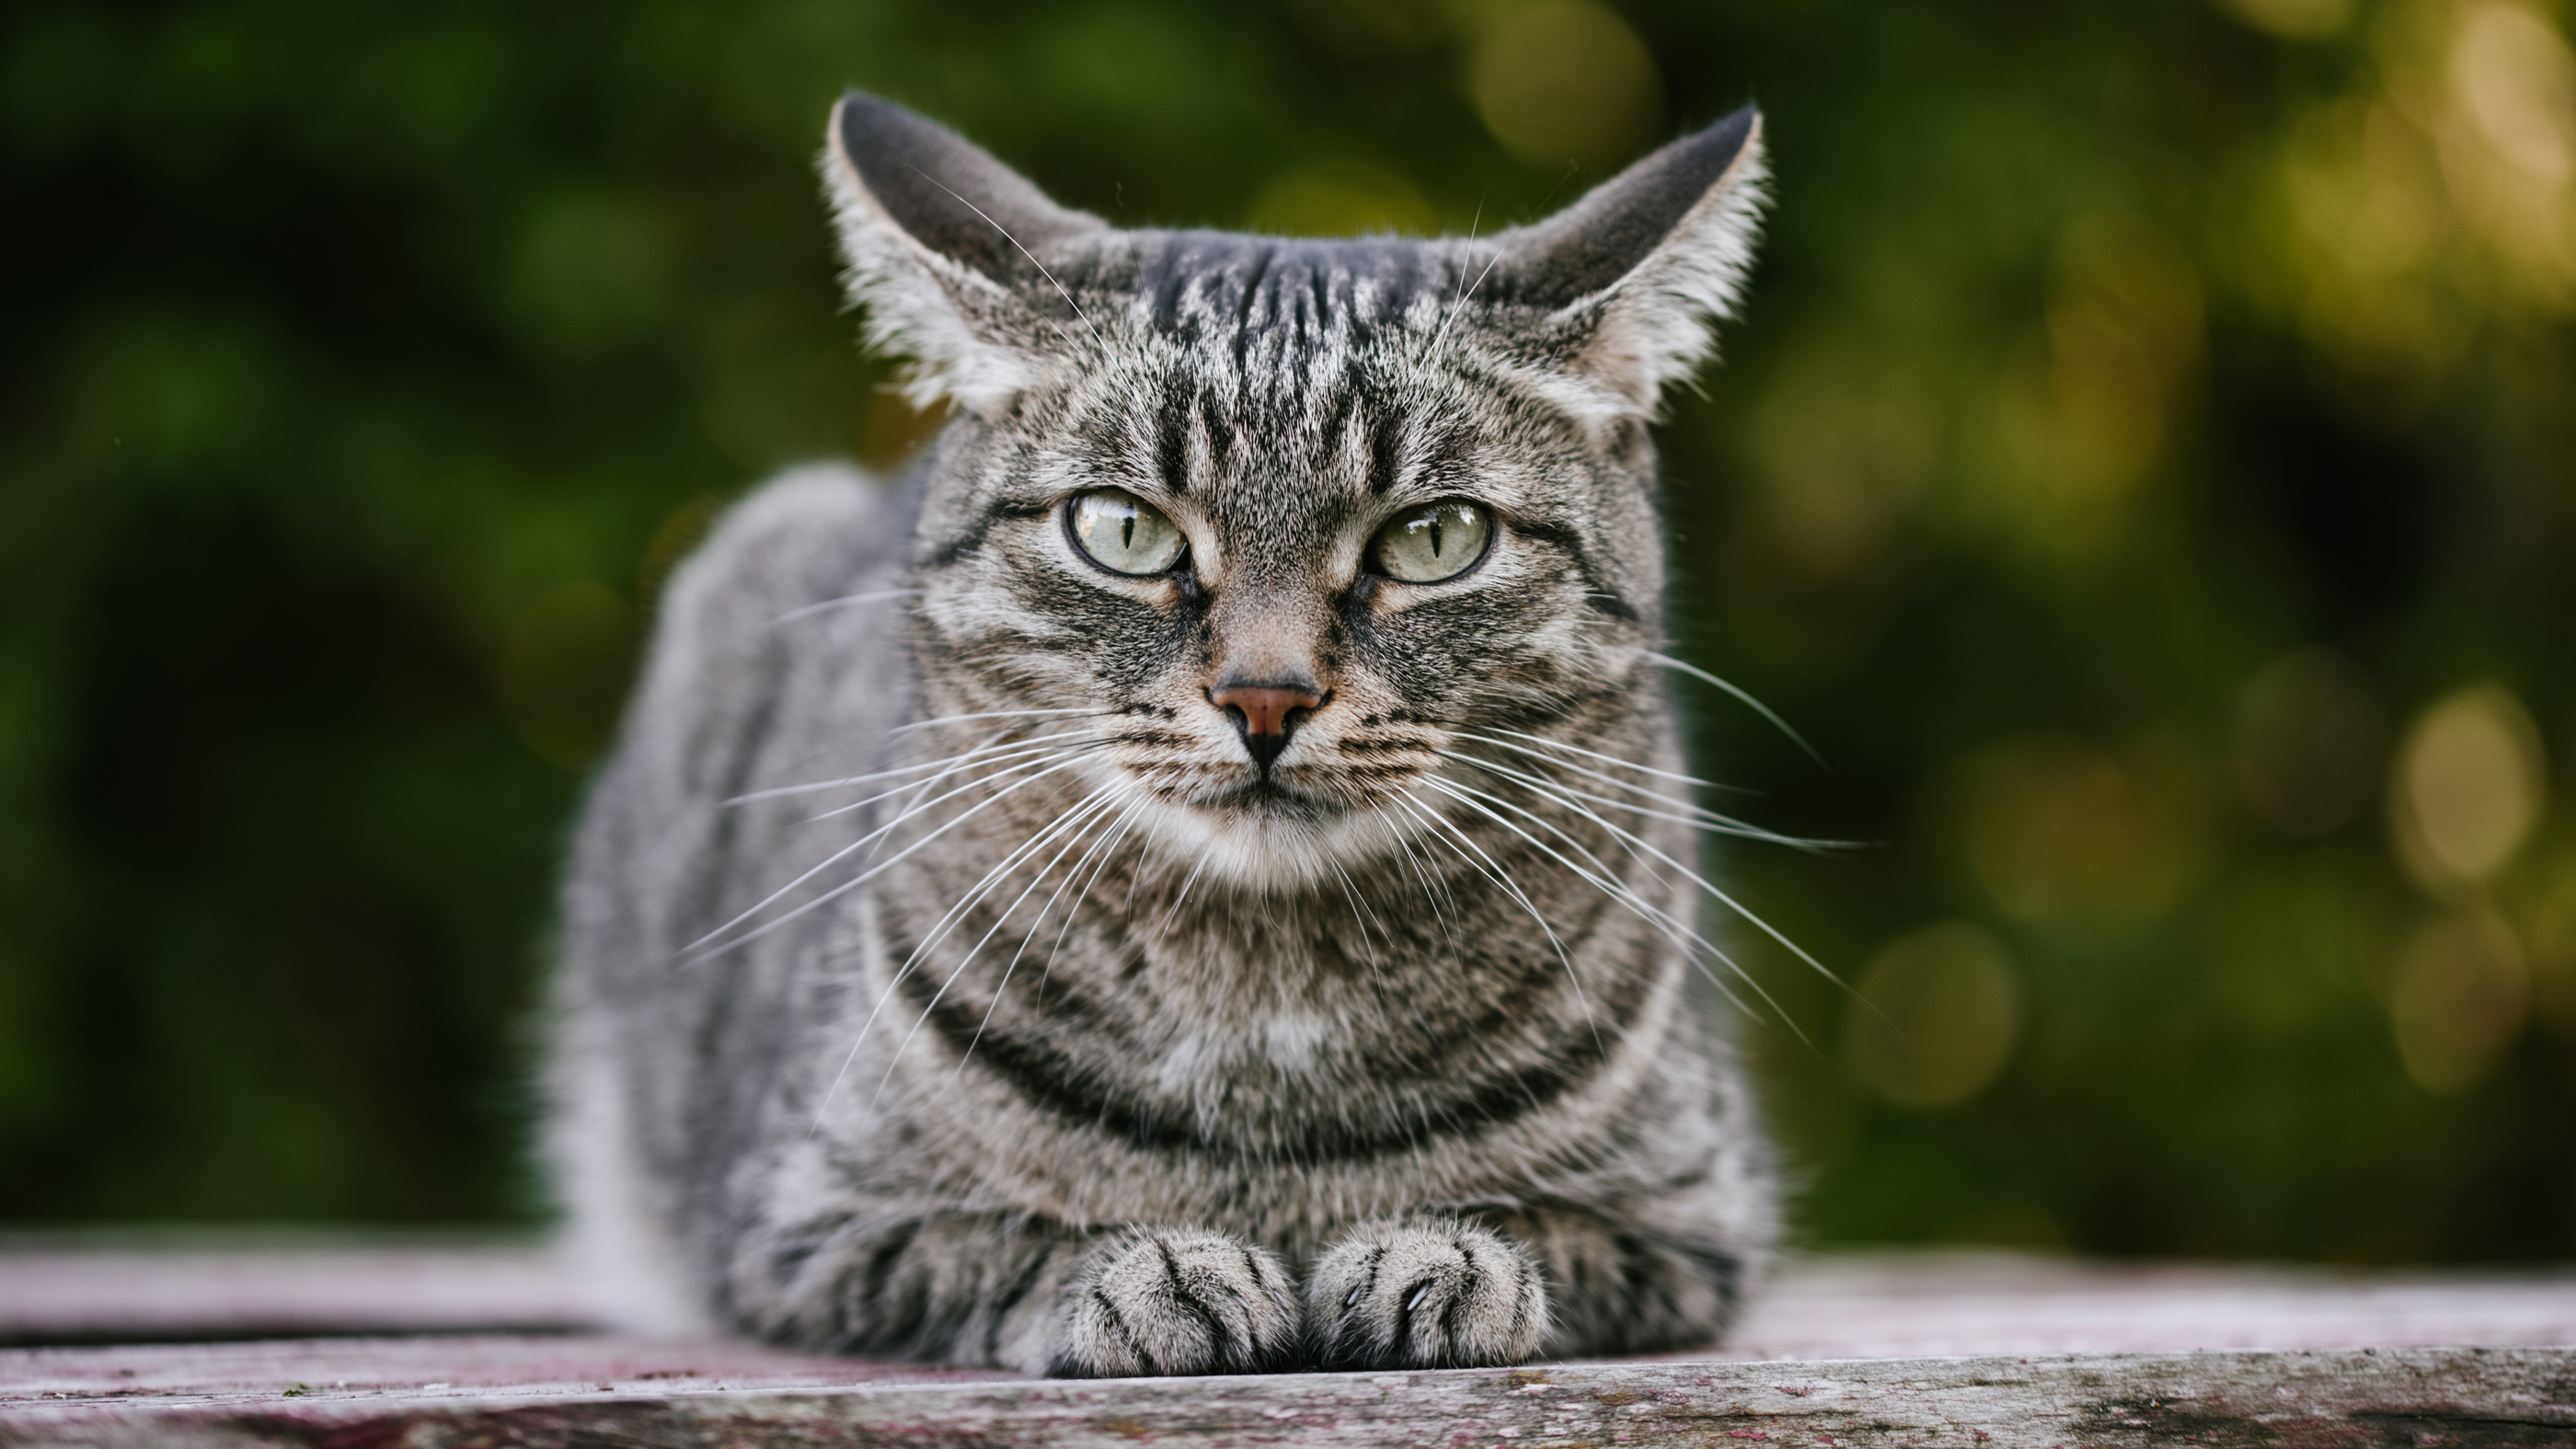 New Research Suggests Cats Can Transmit Covid 19 To Other Cats